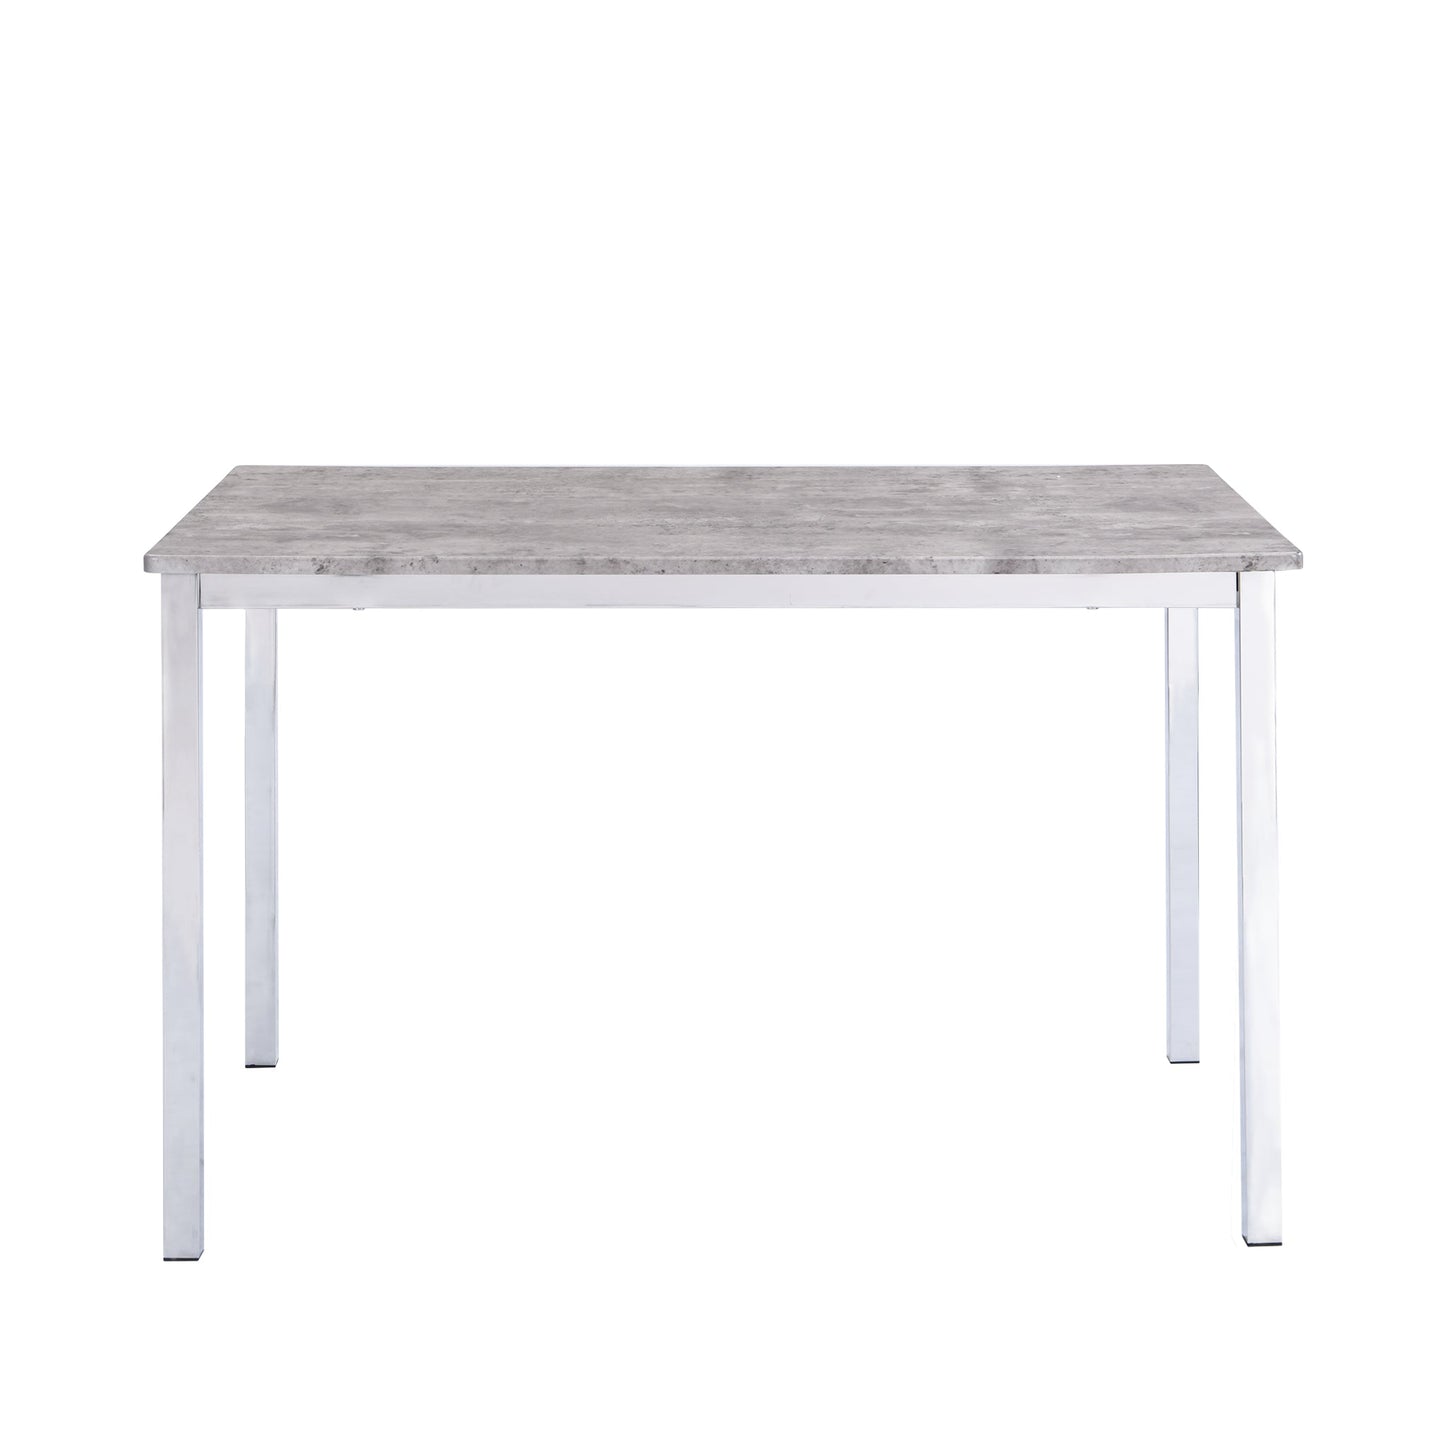 Milo dining table - 4 seater - concrete effect and chrome - Laura James